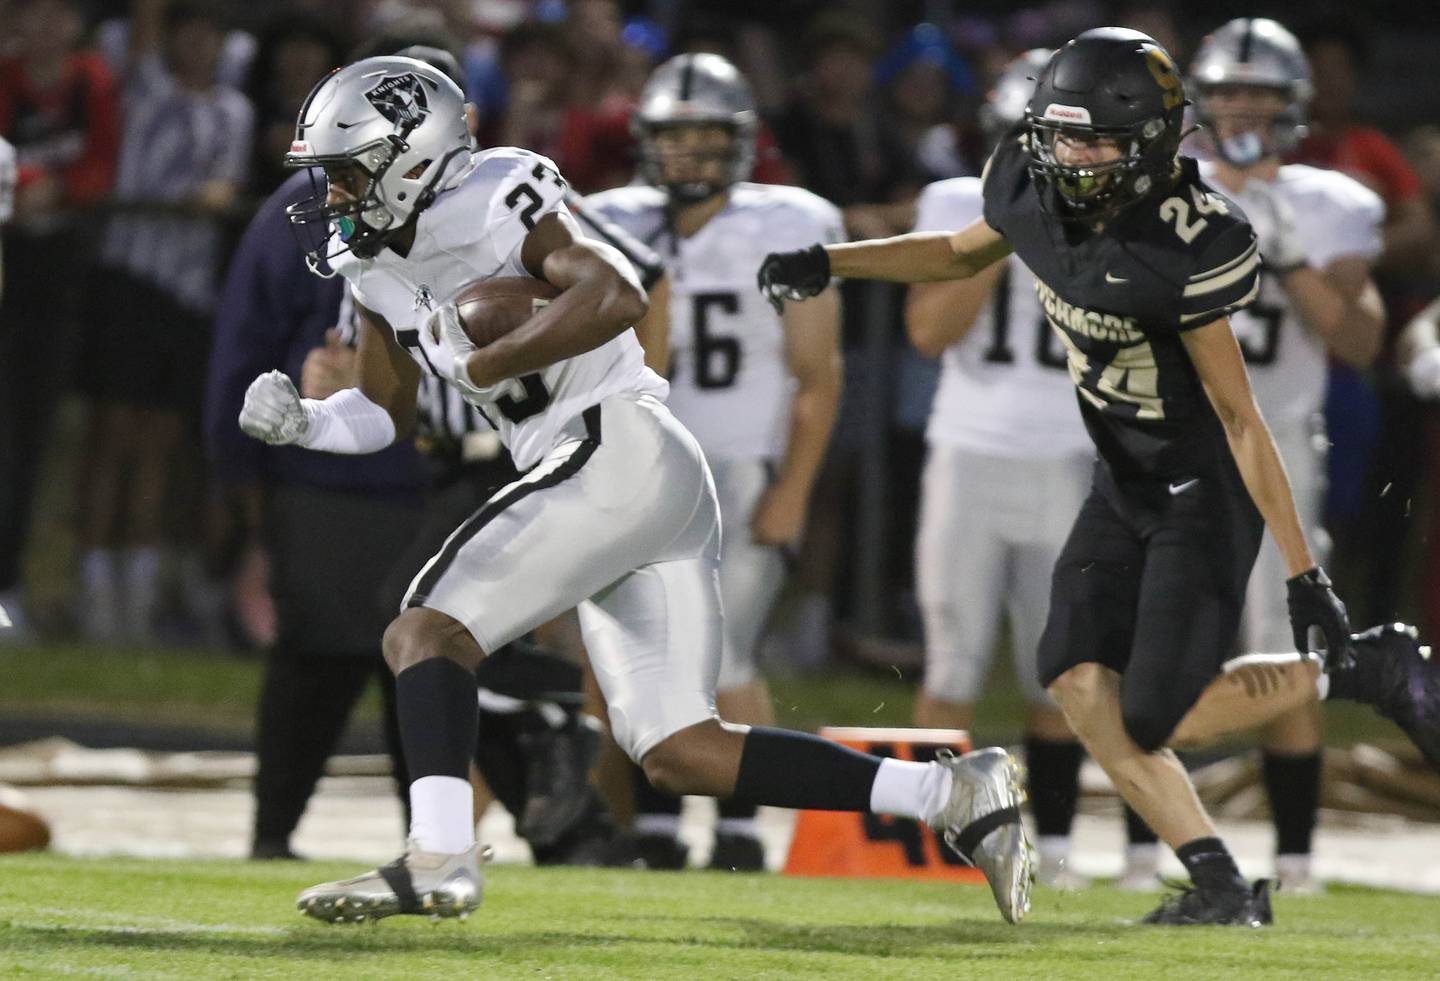 Kaneland's Aric Johnson gets past Sycamore's William Stewart on his way to a touchdown during their game Friday, Sep. 10, 2021 at Sycamore High School.